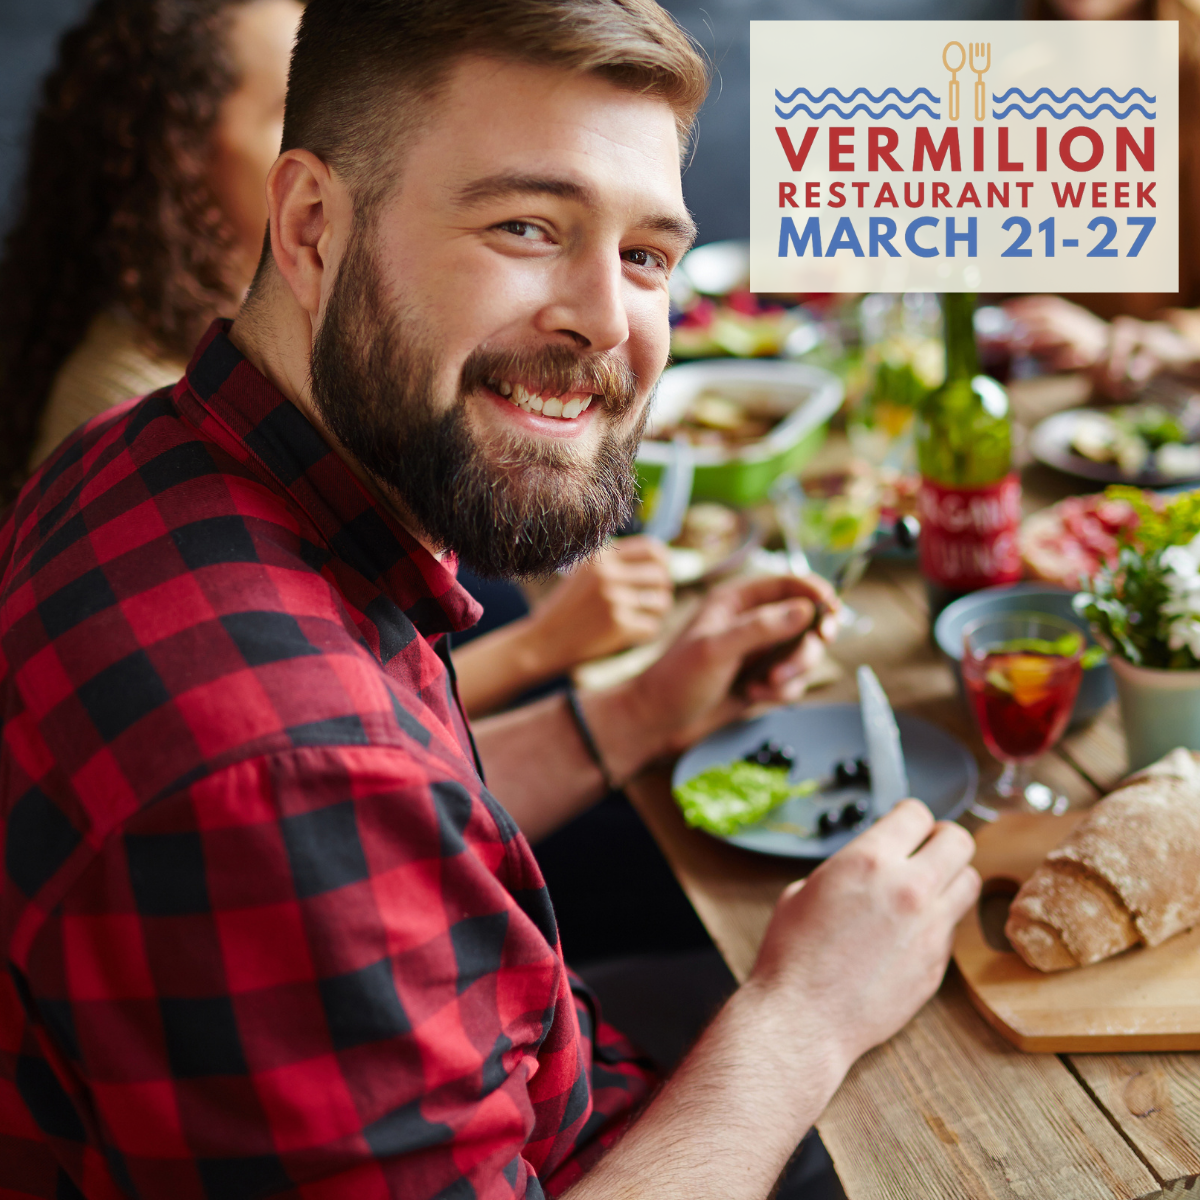 What Does Restaurant Week Look Like in A Small Town on a Great Lake? — Main Street Vermilion